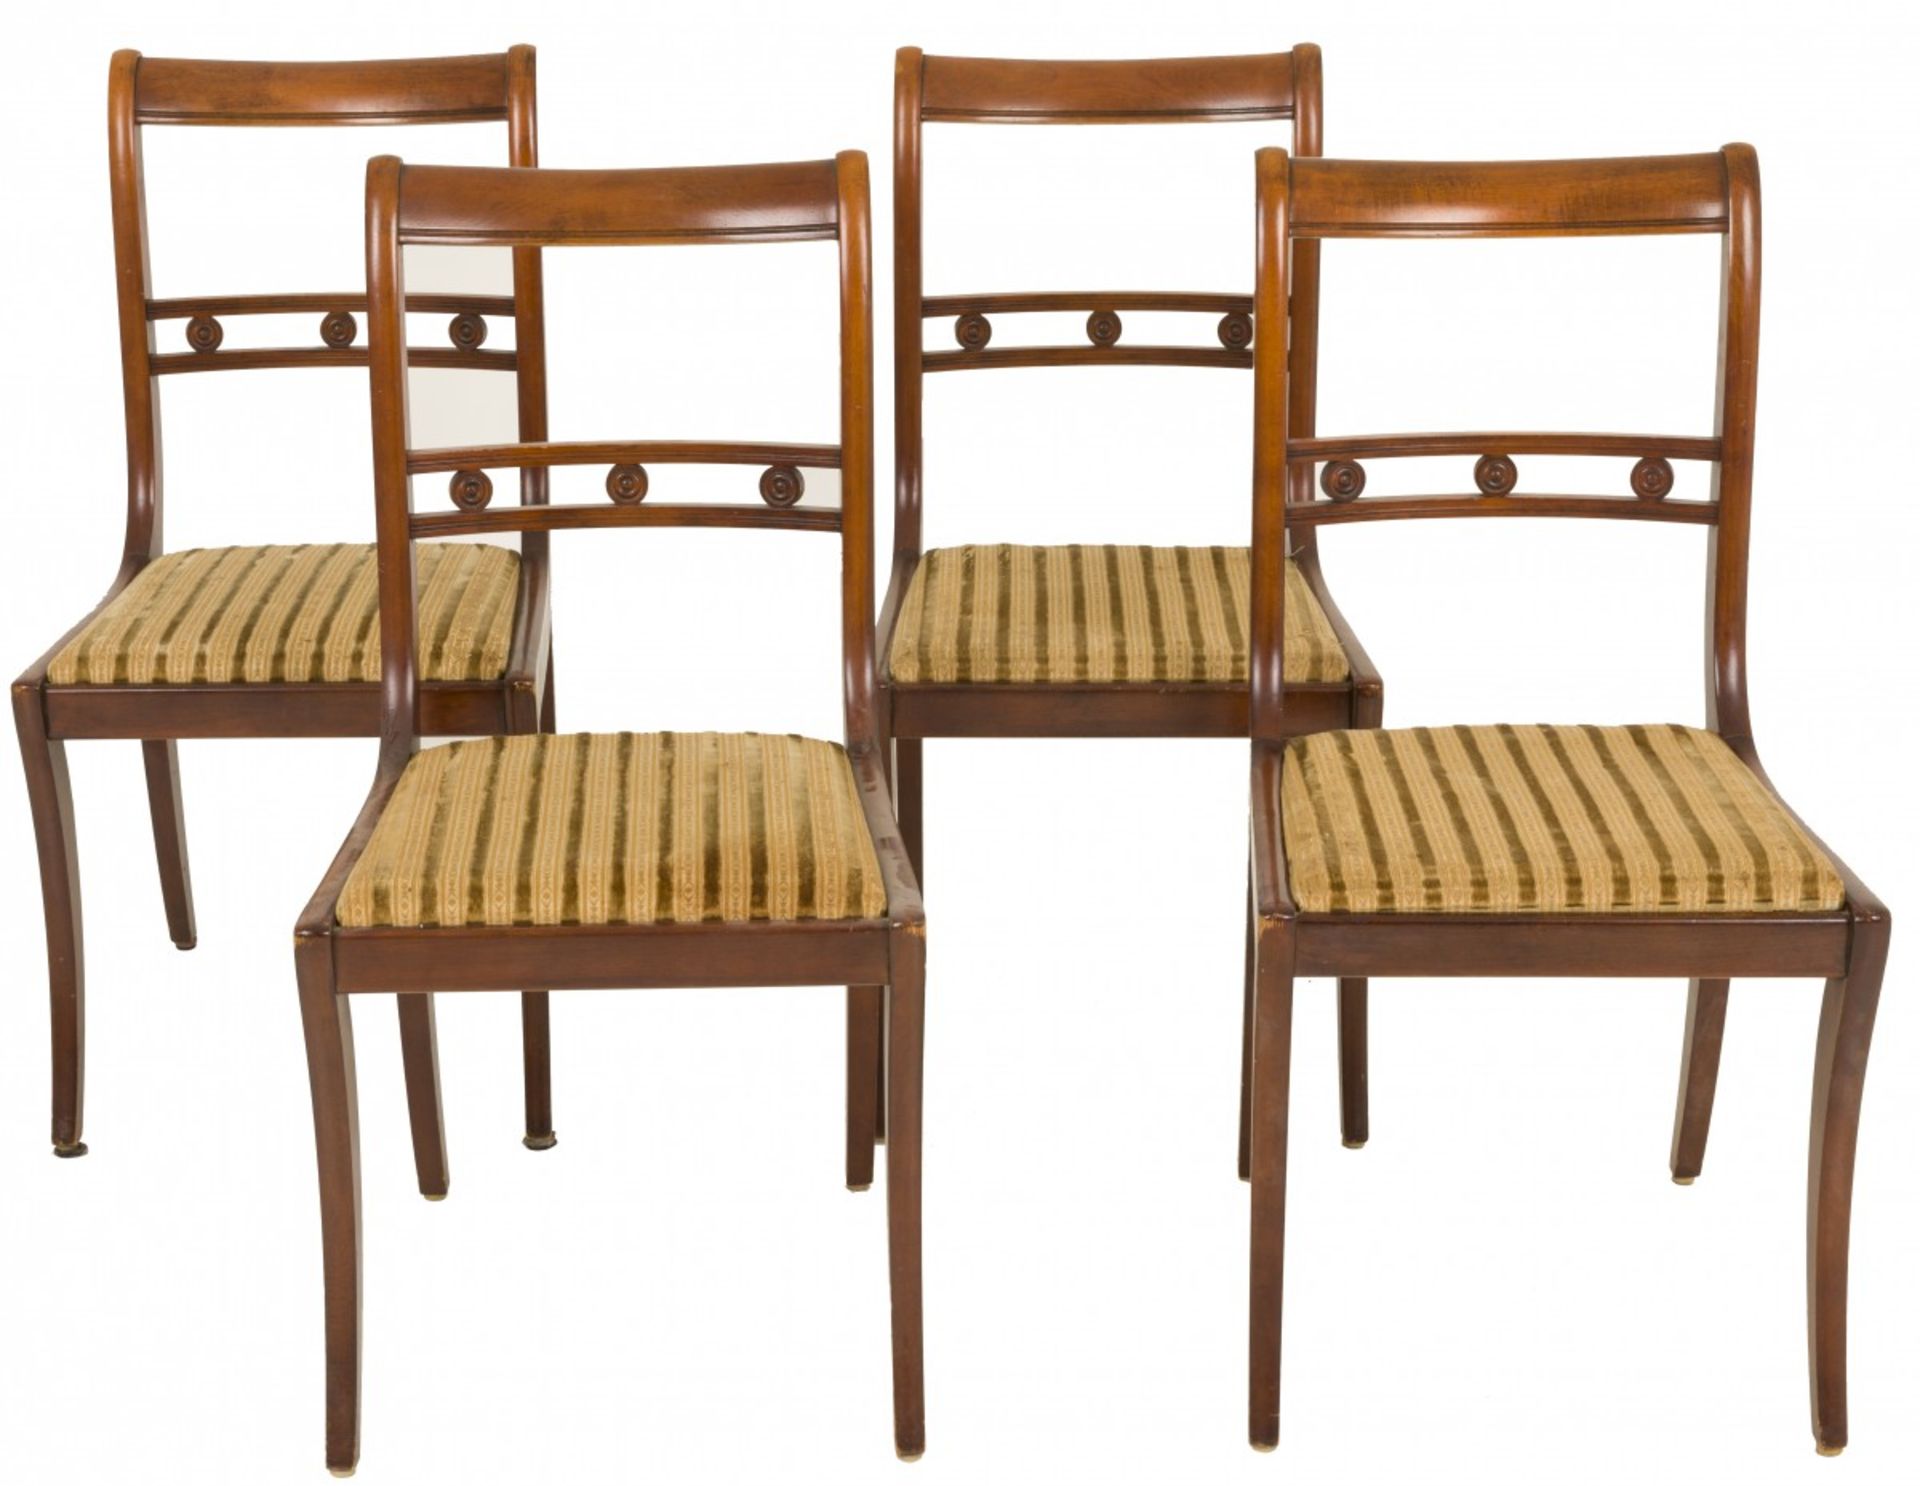 A set of (4) Regency-style mahogany dining chairs, 20th century.